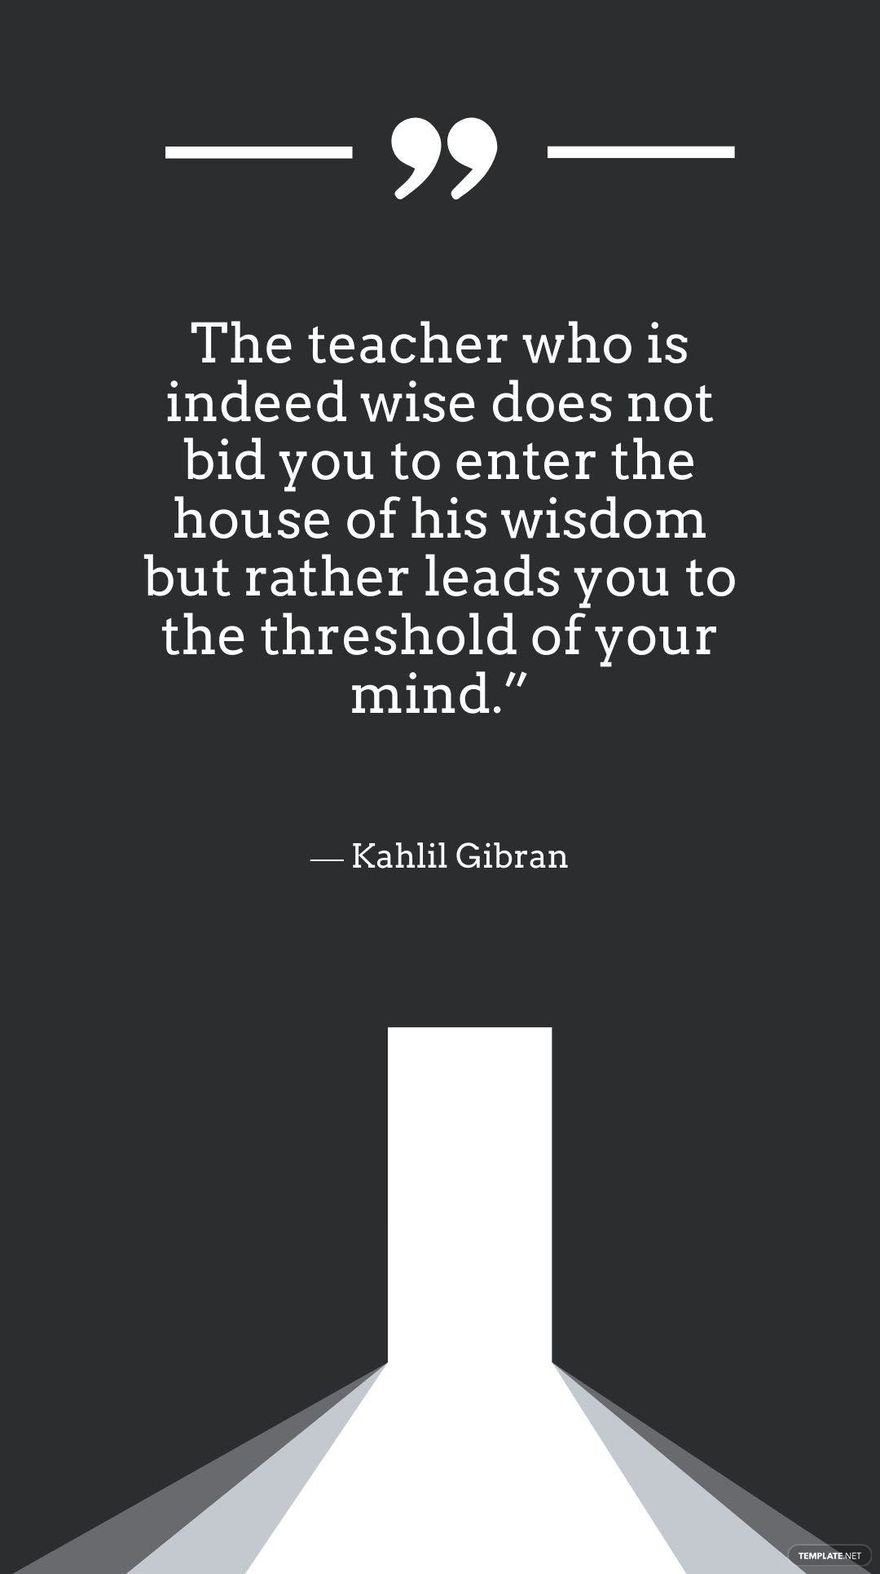 Kahlil Gibran - The teacher who is indeed wise does not bid you to enter the house of his wisdom but rather leads you to the threshold of your mind. in JPG